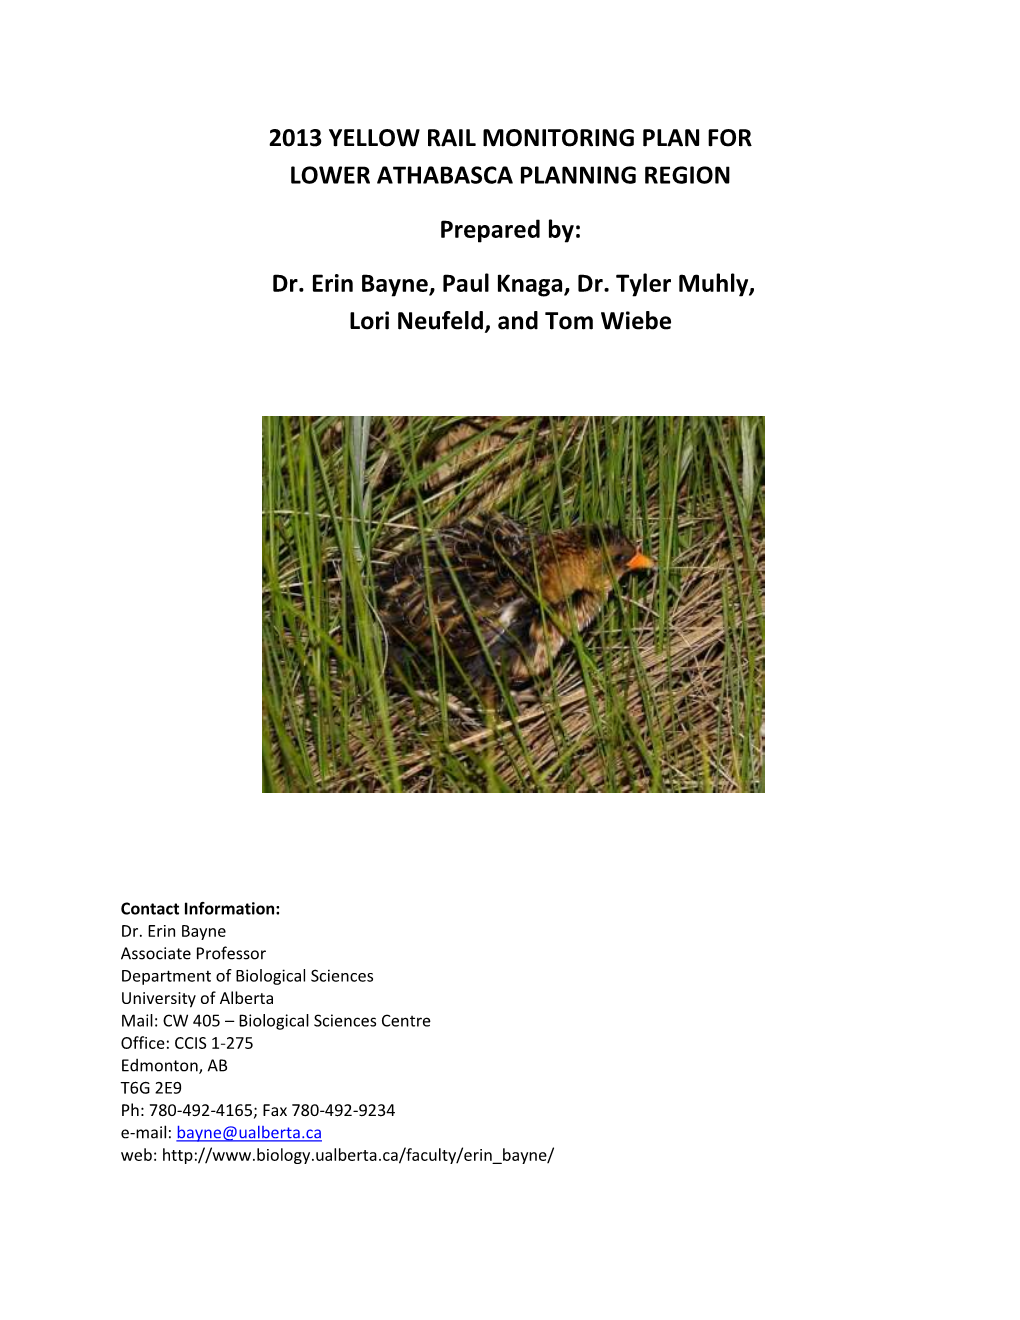 2013 Yellow Rail Monitoring Plan for Lower Athabasca Planning Region